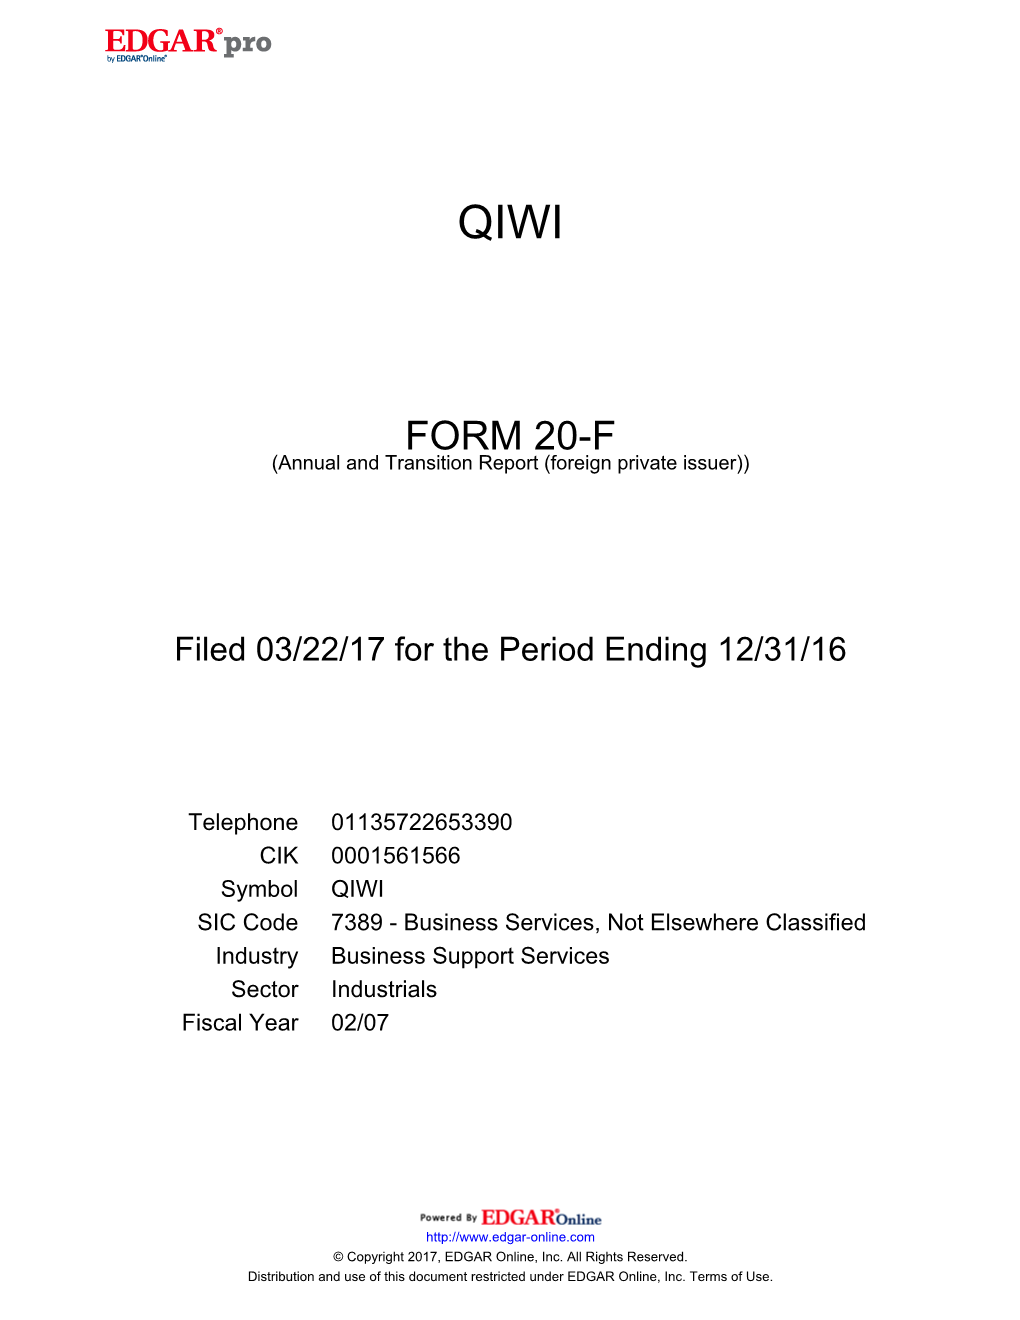 FORM 20-F (Annual and Transition Report (Foreign Private Issuer))